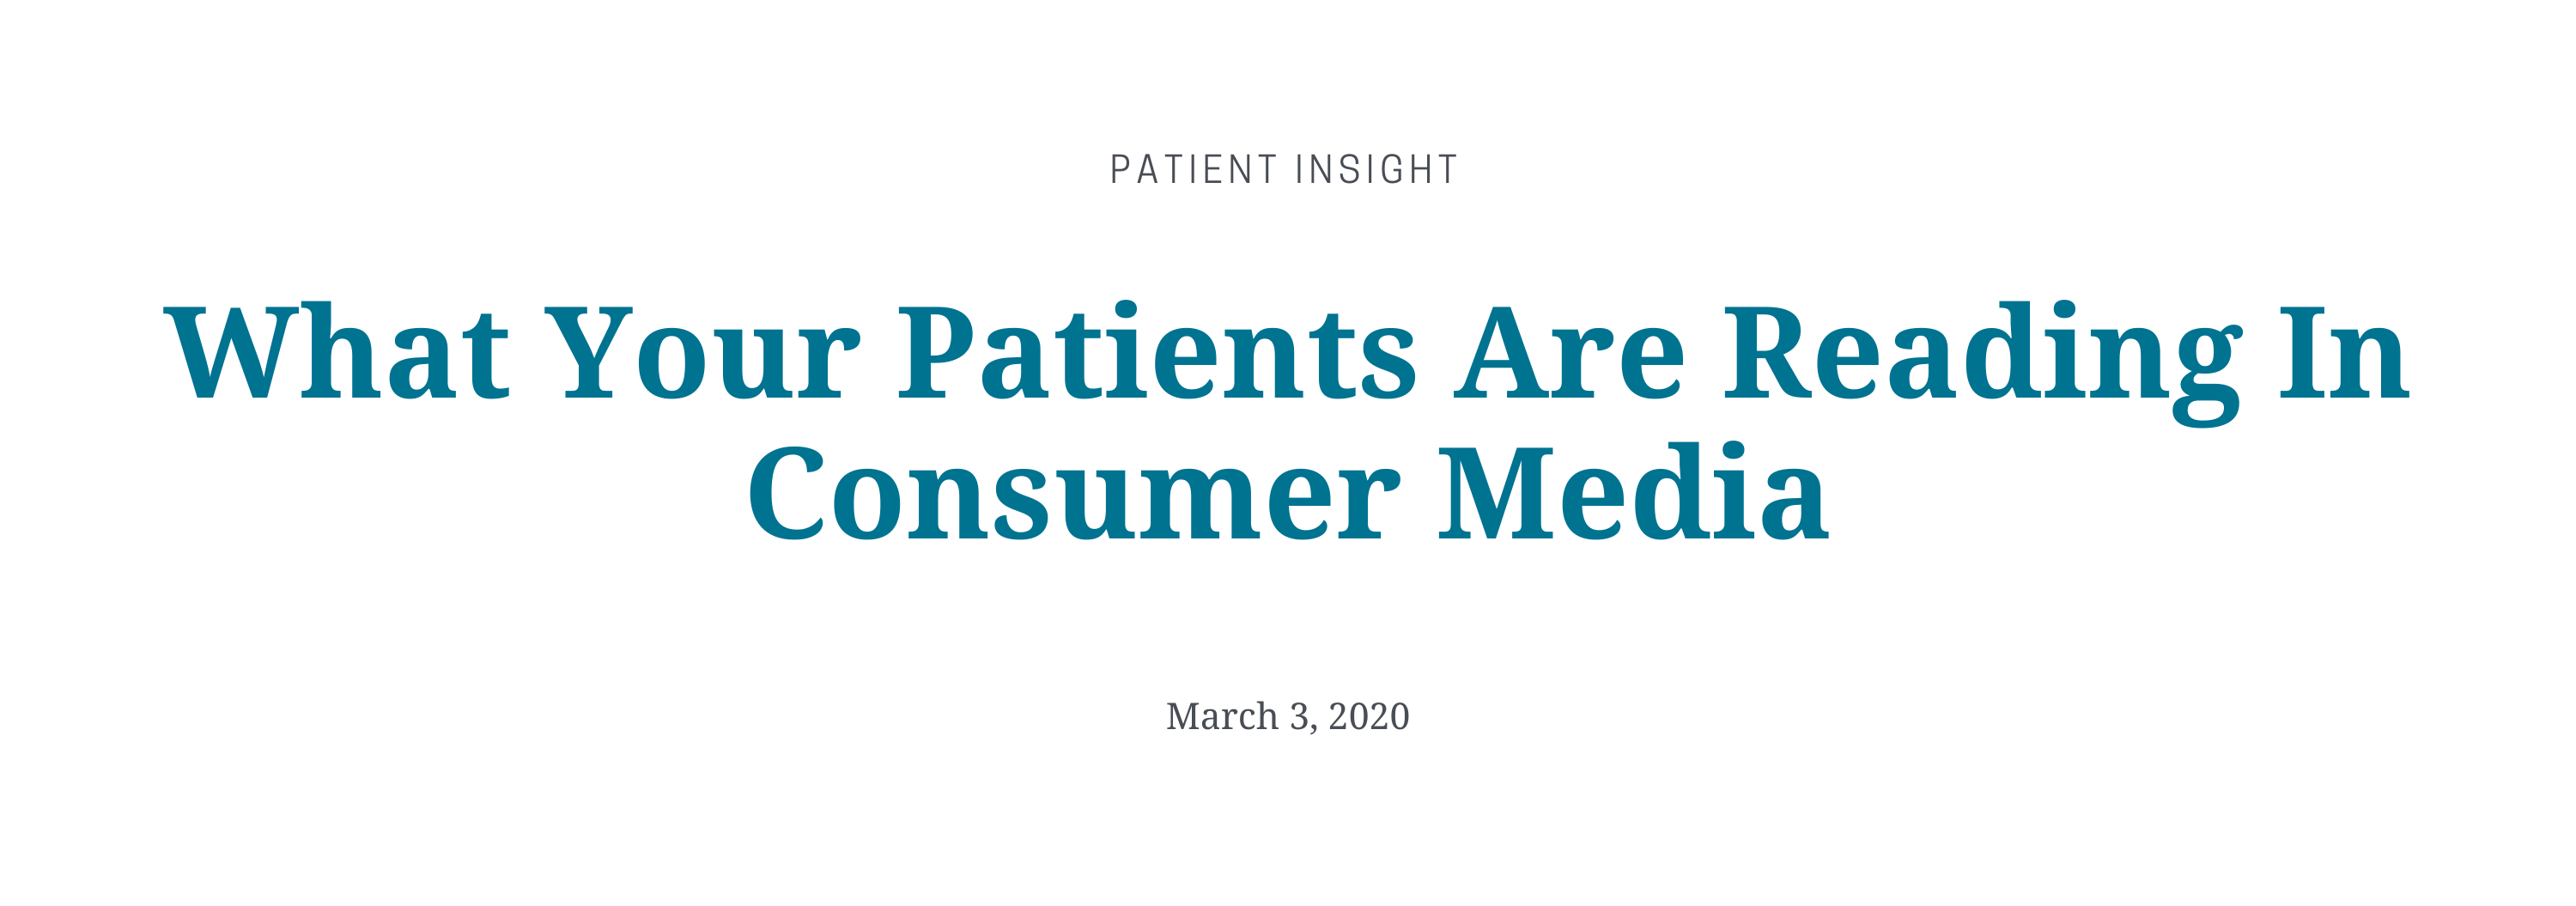 Patient Insight March 3